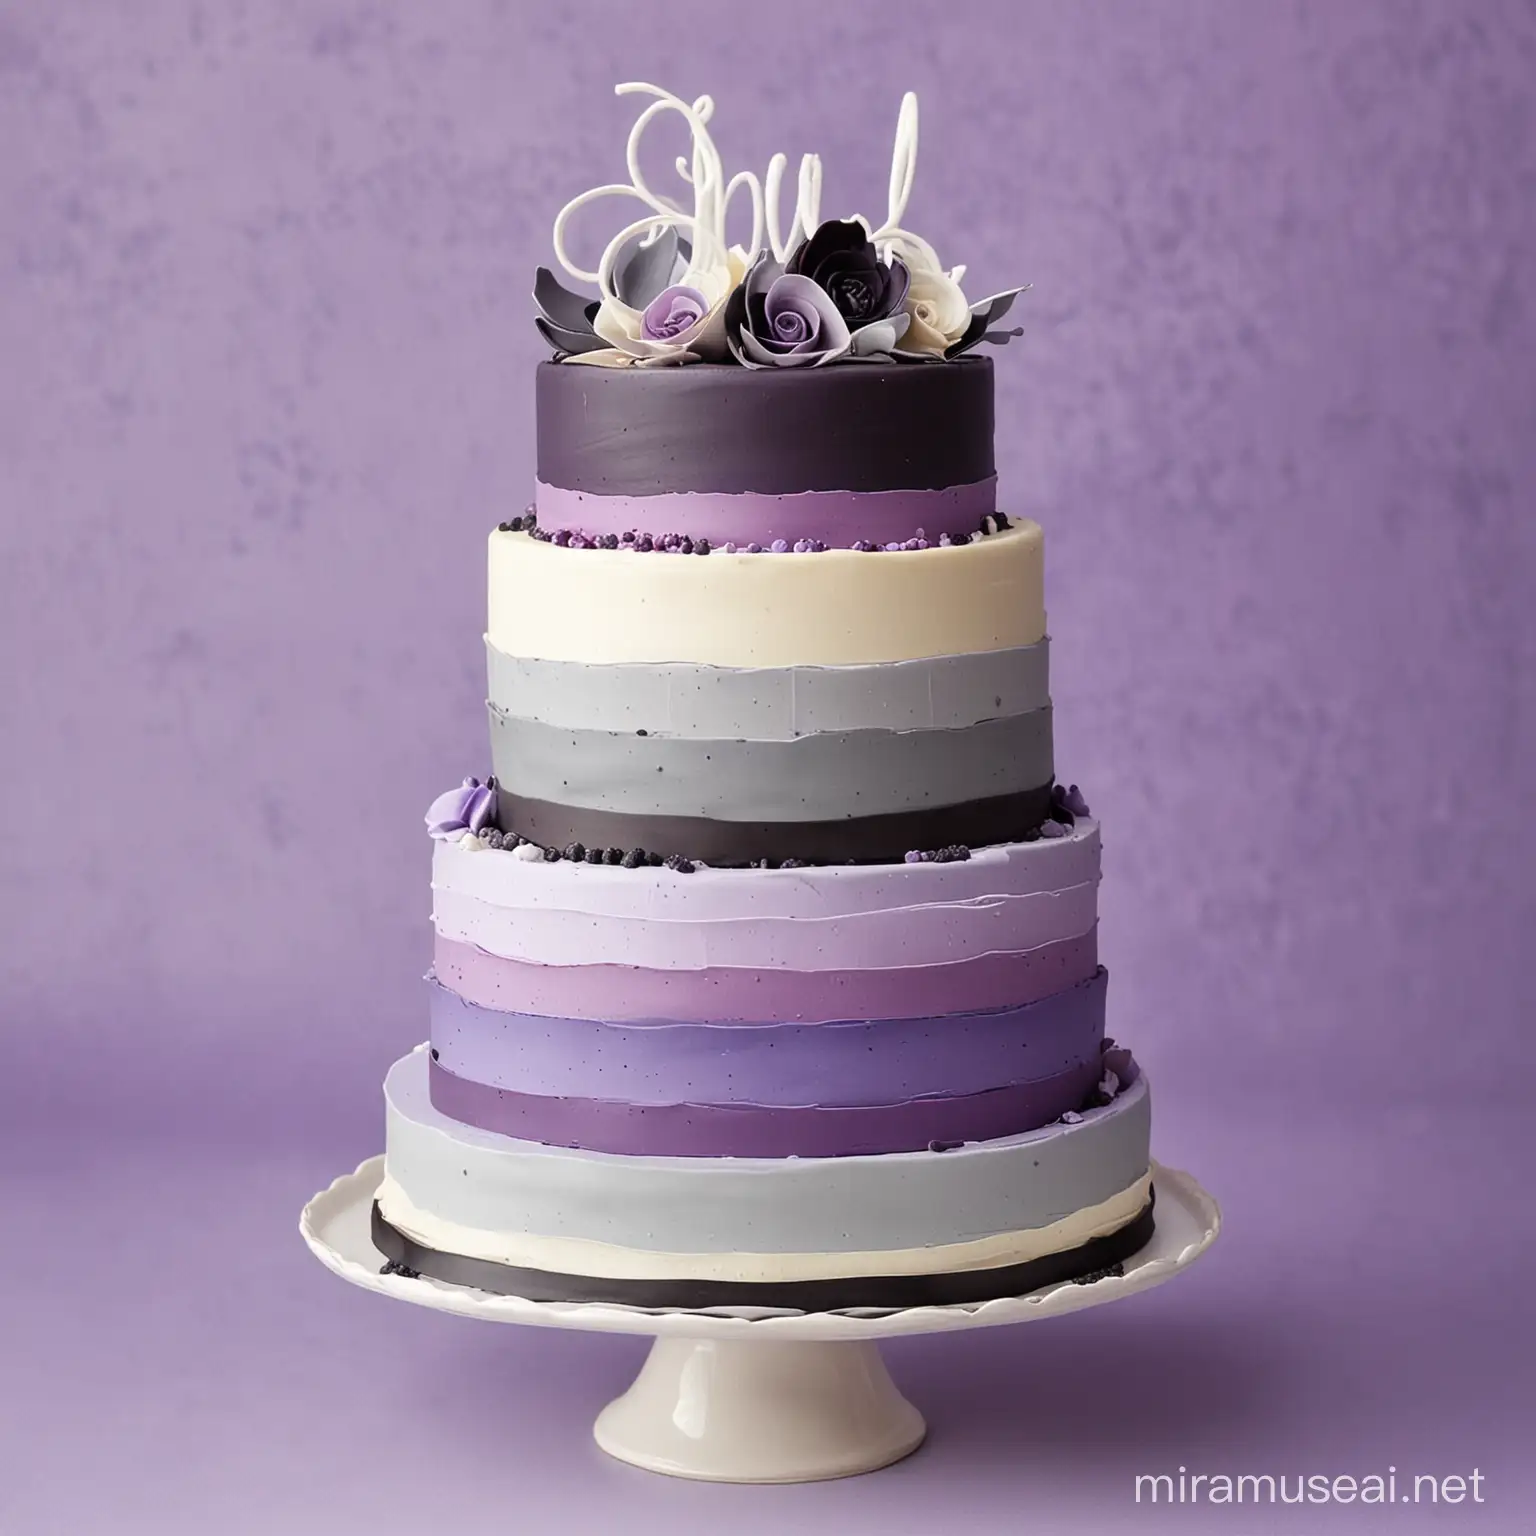 Three Tiered Cake in Elegant Asexual Colors